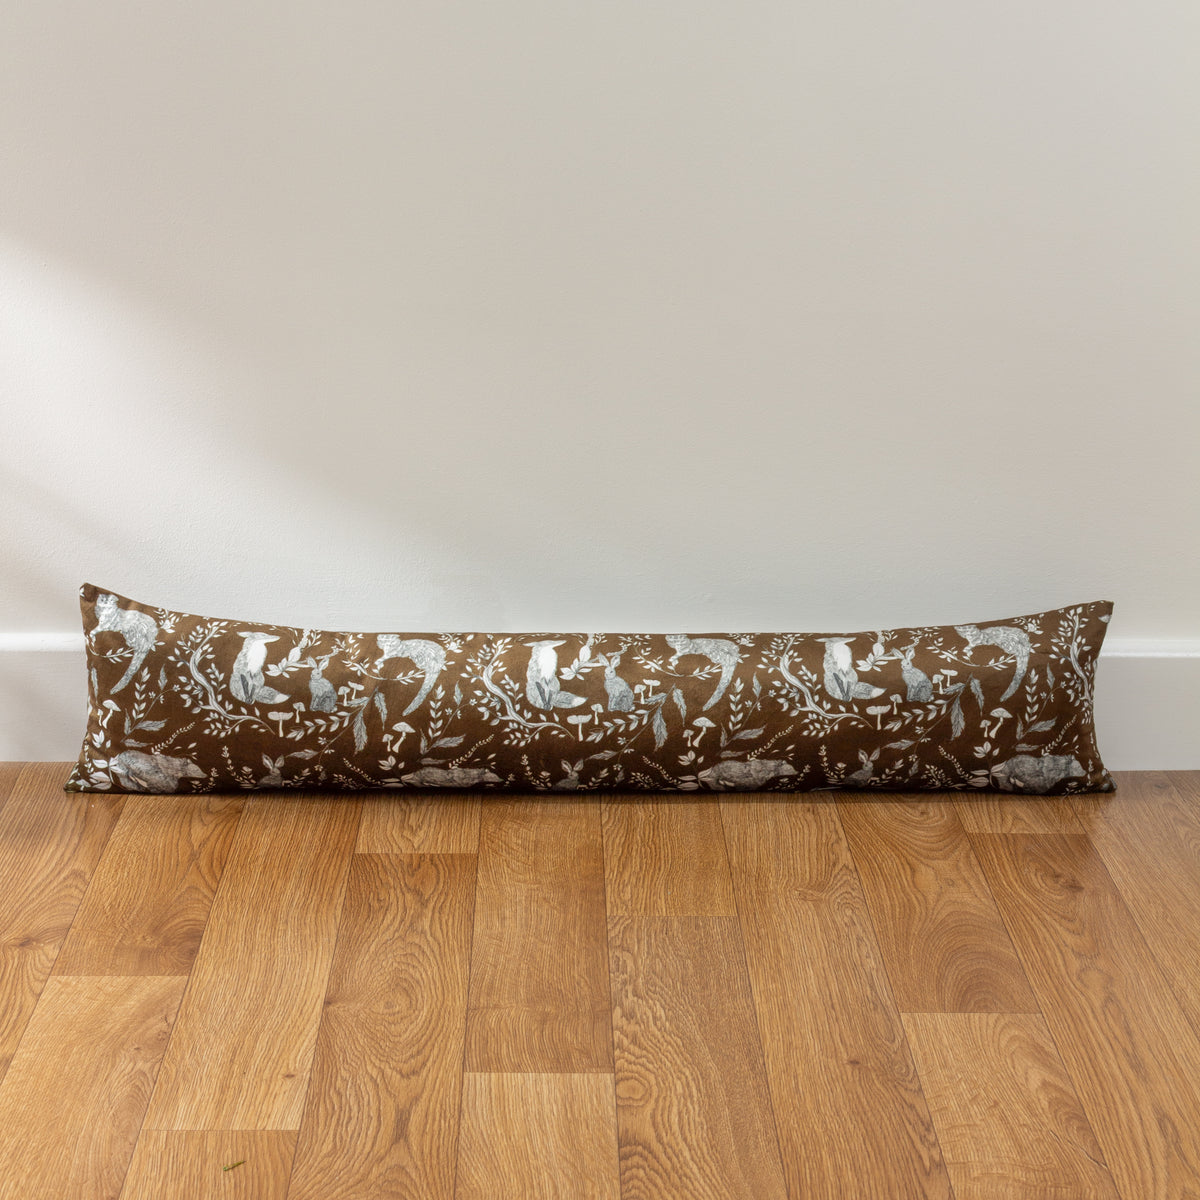 Buckthorn Woodland Draught Excluder